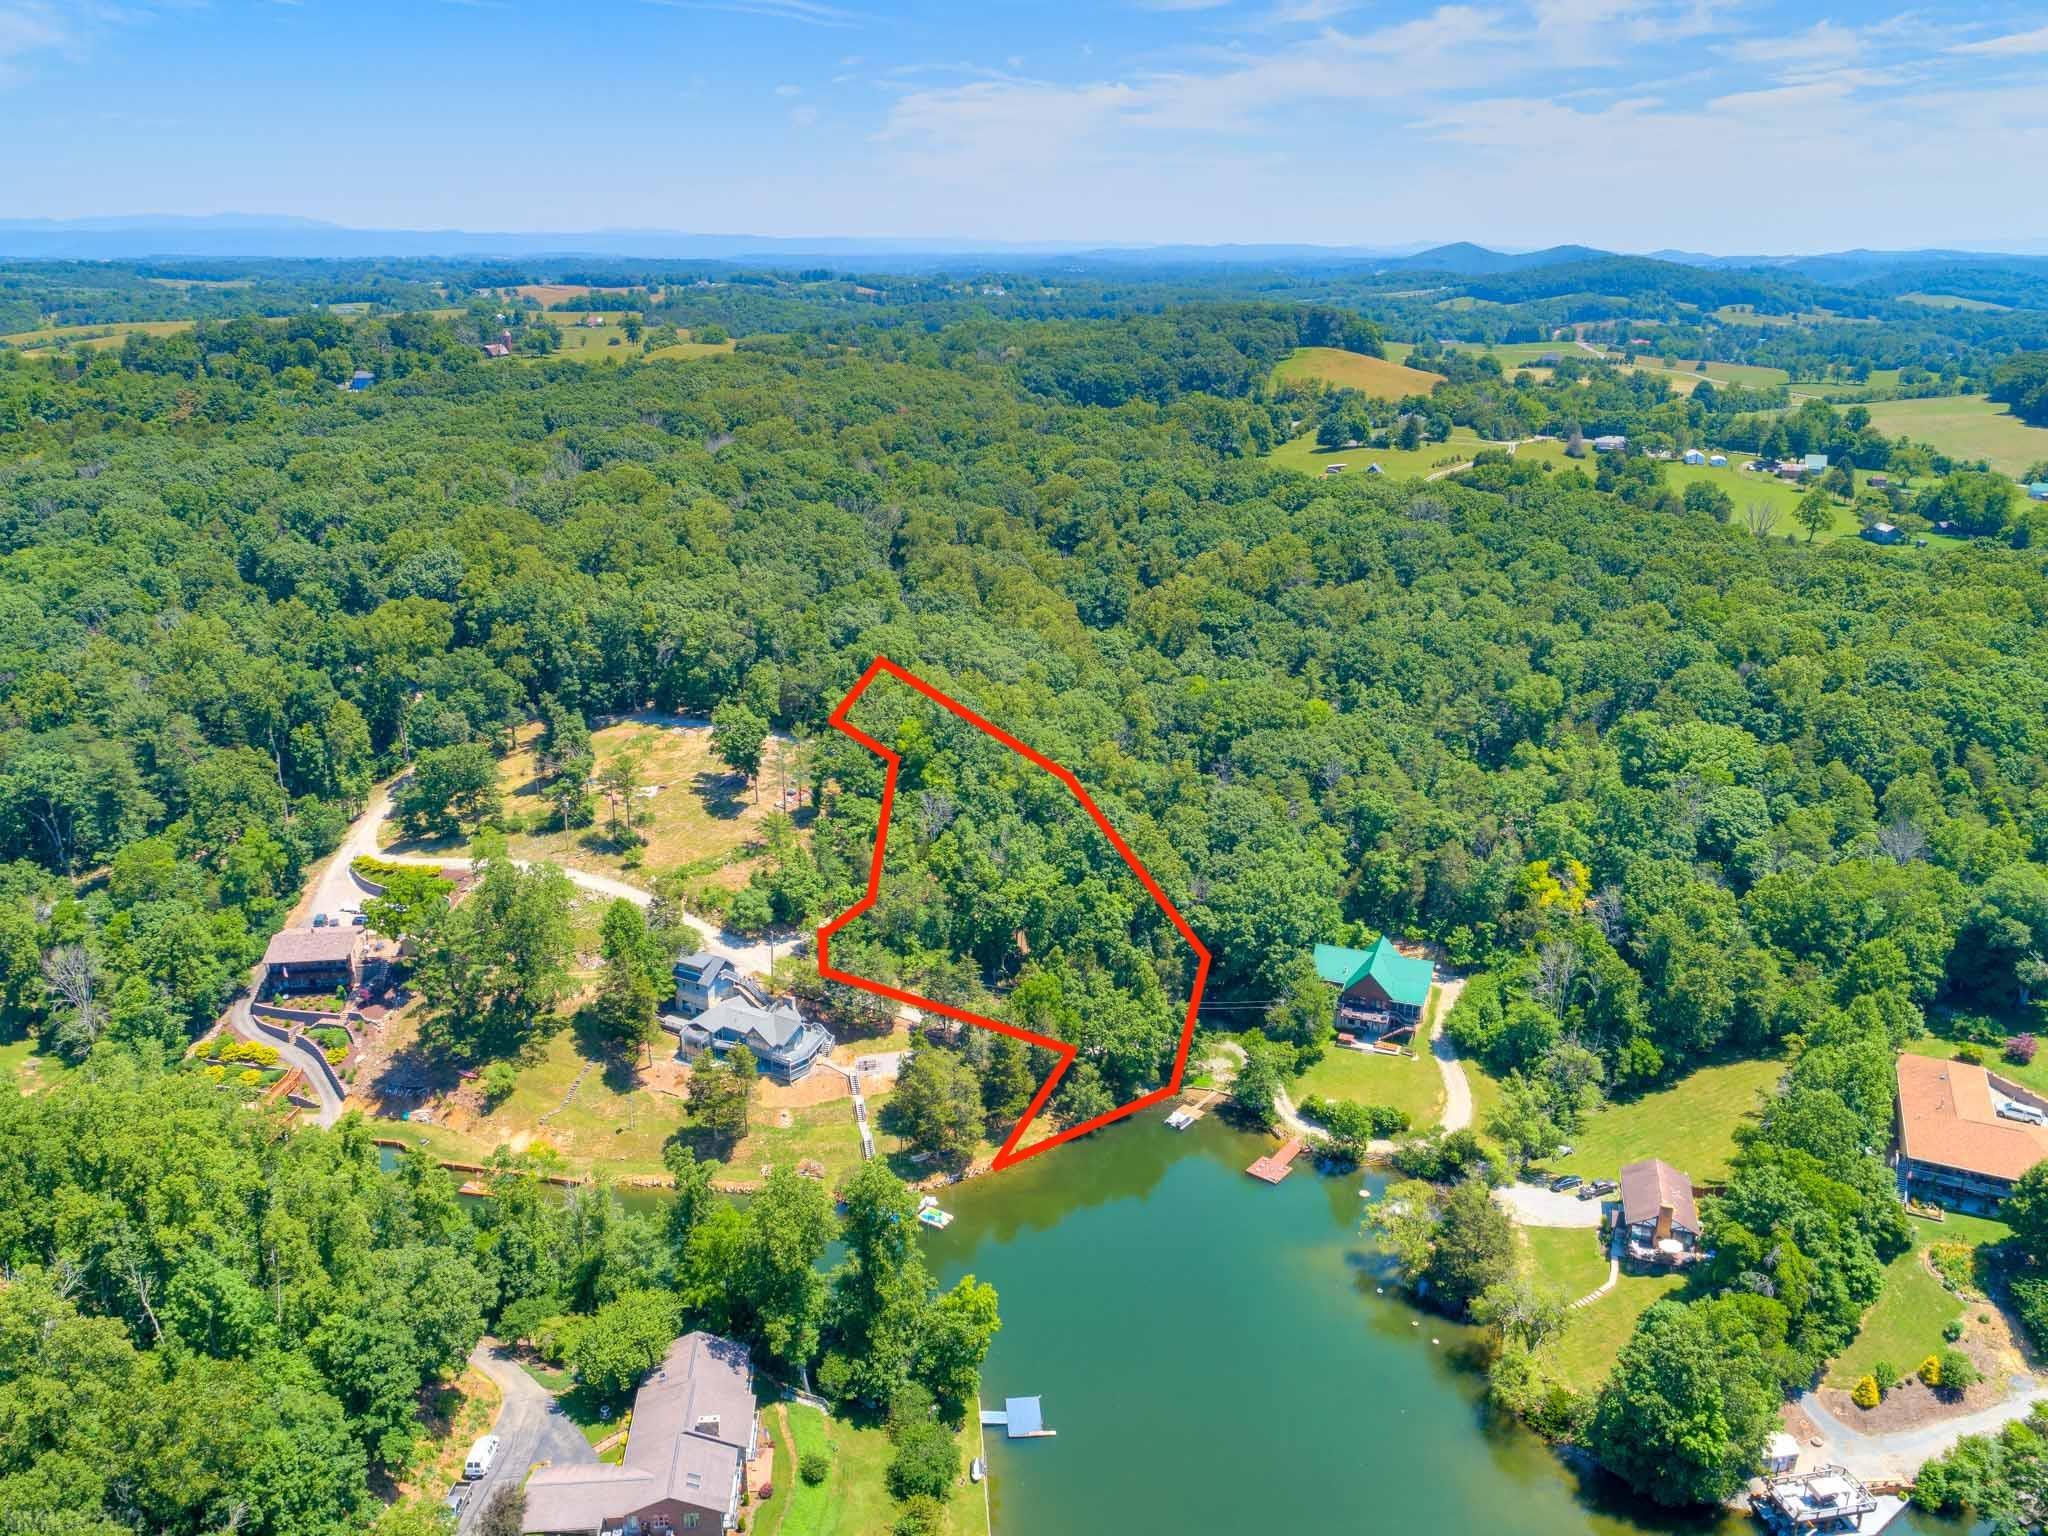 Beautiful WATERFRONT lot with 130' water frontage on Claytor Lake!  Everything is in place for you to build your dream home in this nice neighborhood located in a wide cove close to Claytor Lake State Park.  Easy to get to, this lot is only 5 minutes from I-81 exit 101, so all the amenities are just a close drive away!  Dining, medical, etc. close by!  Please see attached documents for dock drawings, survey, etc.